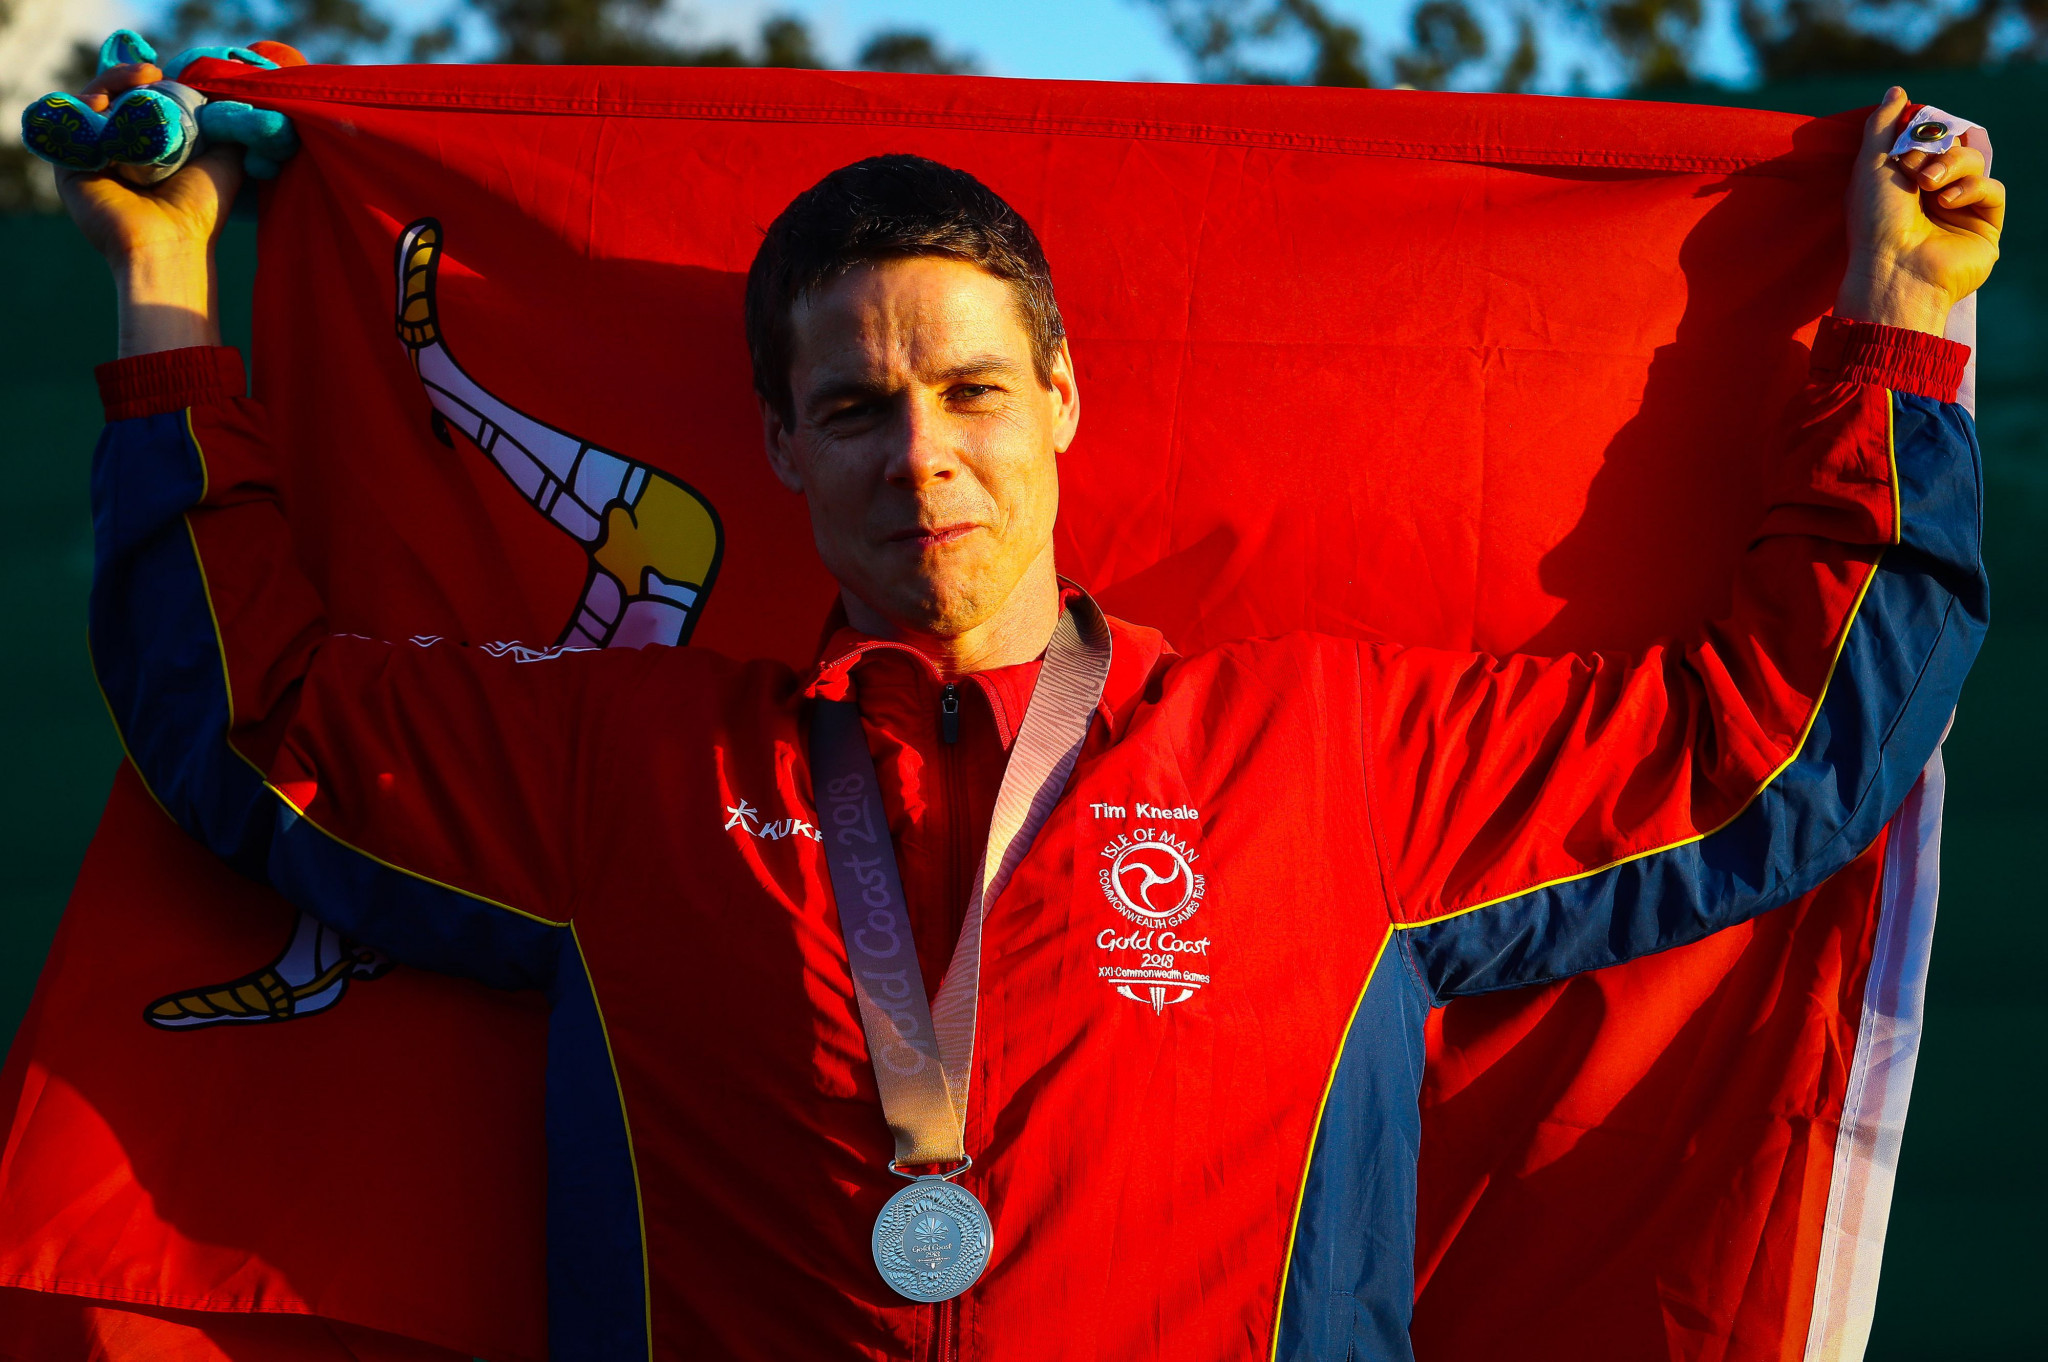 Shooter Tim Kneale won the Isle of Man's last Commonwealth Games gold medal at Gold Coast 2018 ©Getty Images